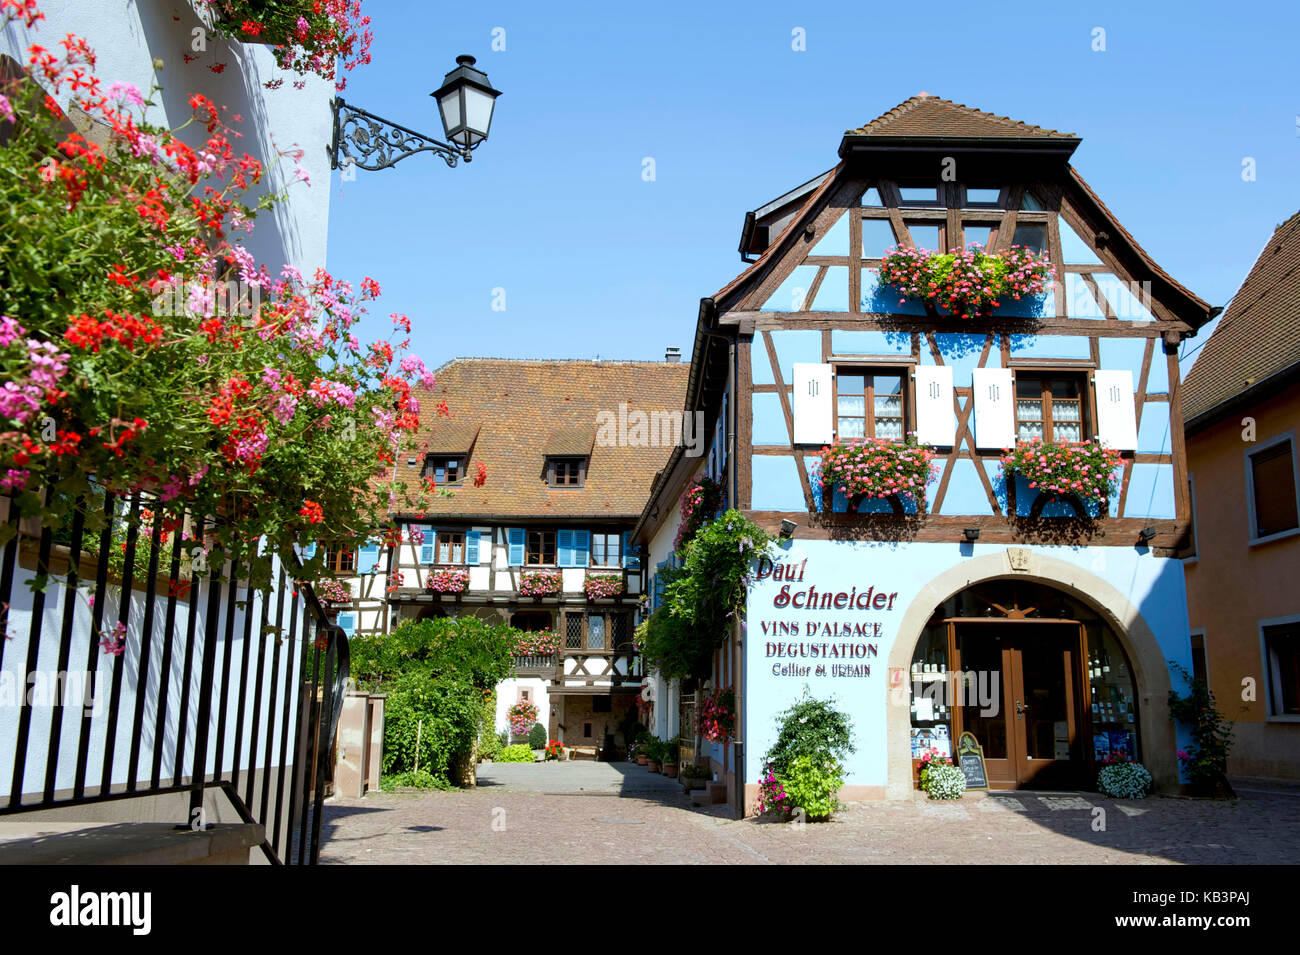 France, Haut Rhin, Alsace Wine Route, Eguisheim, labelled Les Plus Beaux Villages de France (The Most Beautiful Villages of France), traditional half timbered houses, house of the winemaker Paul Schneider Stock Photo